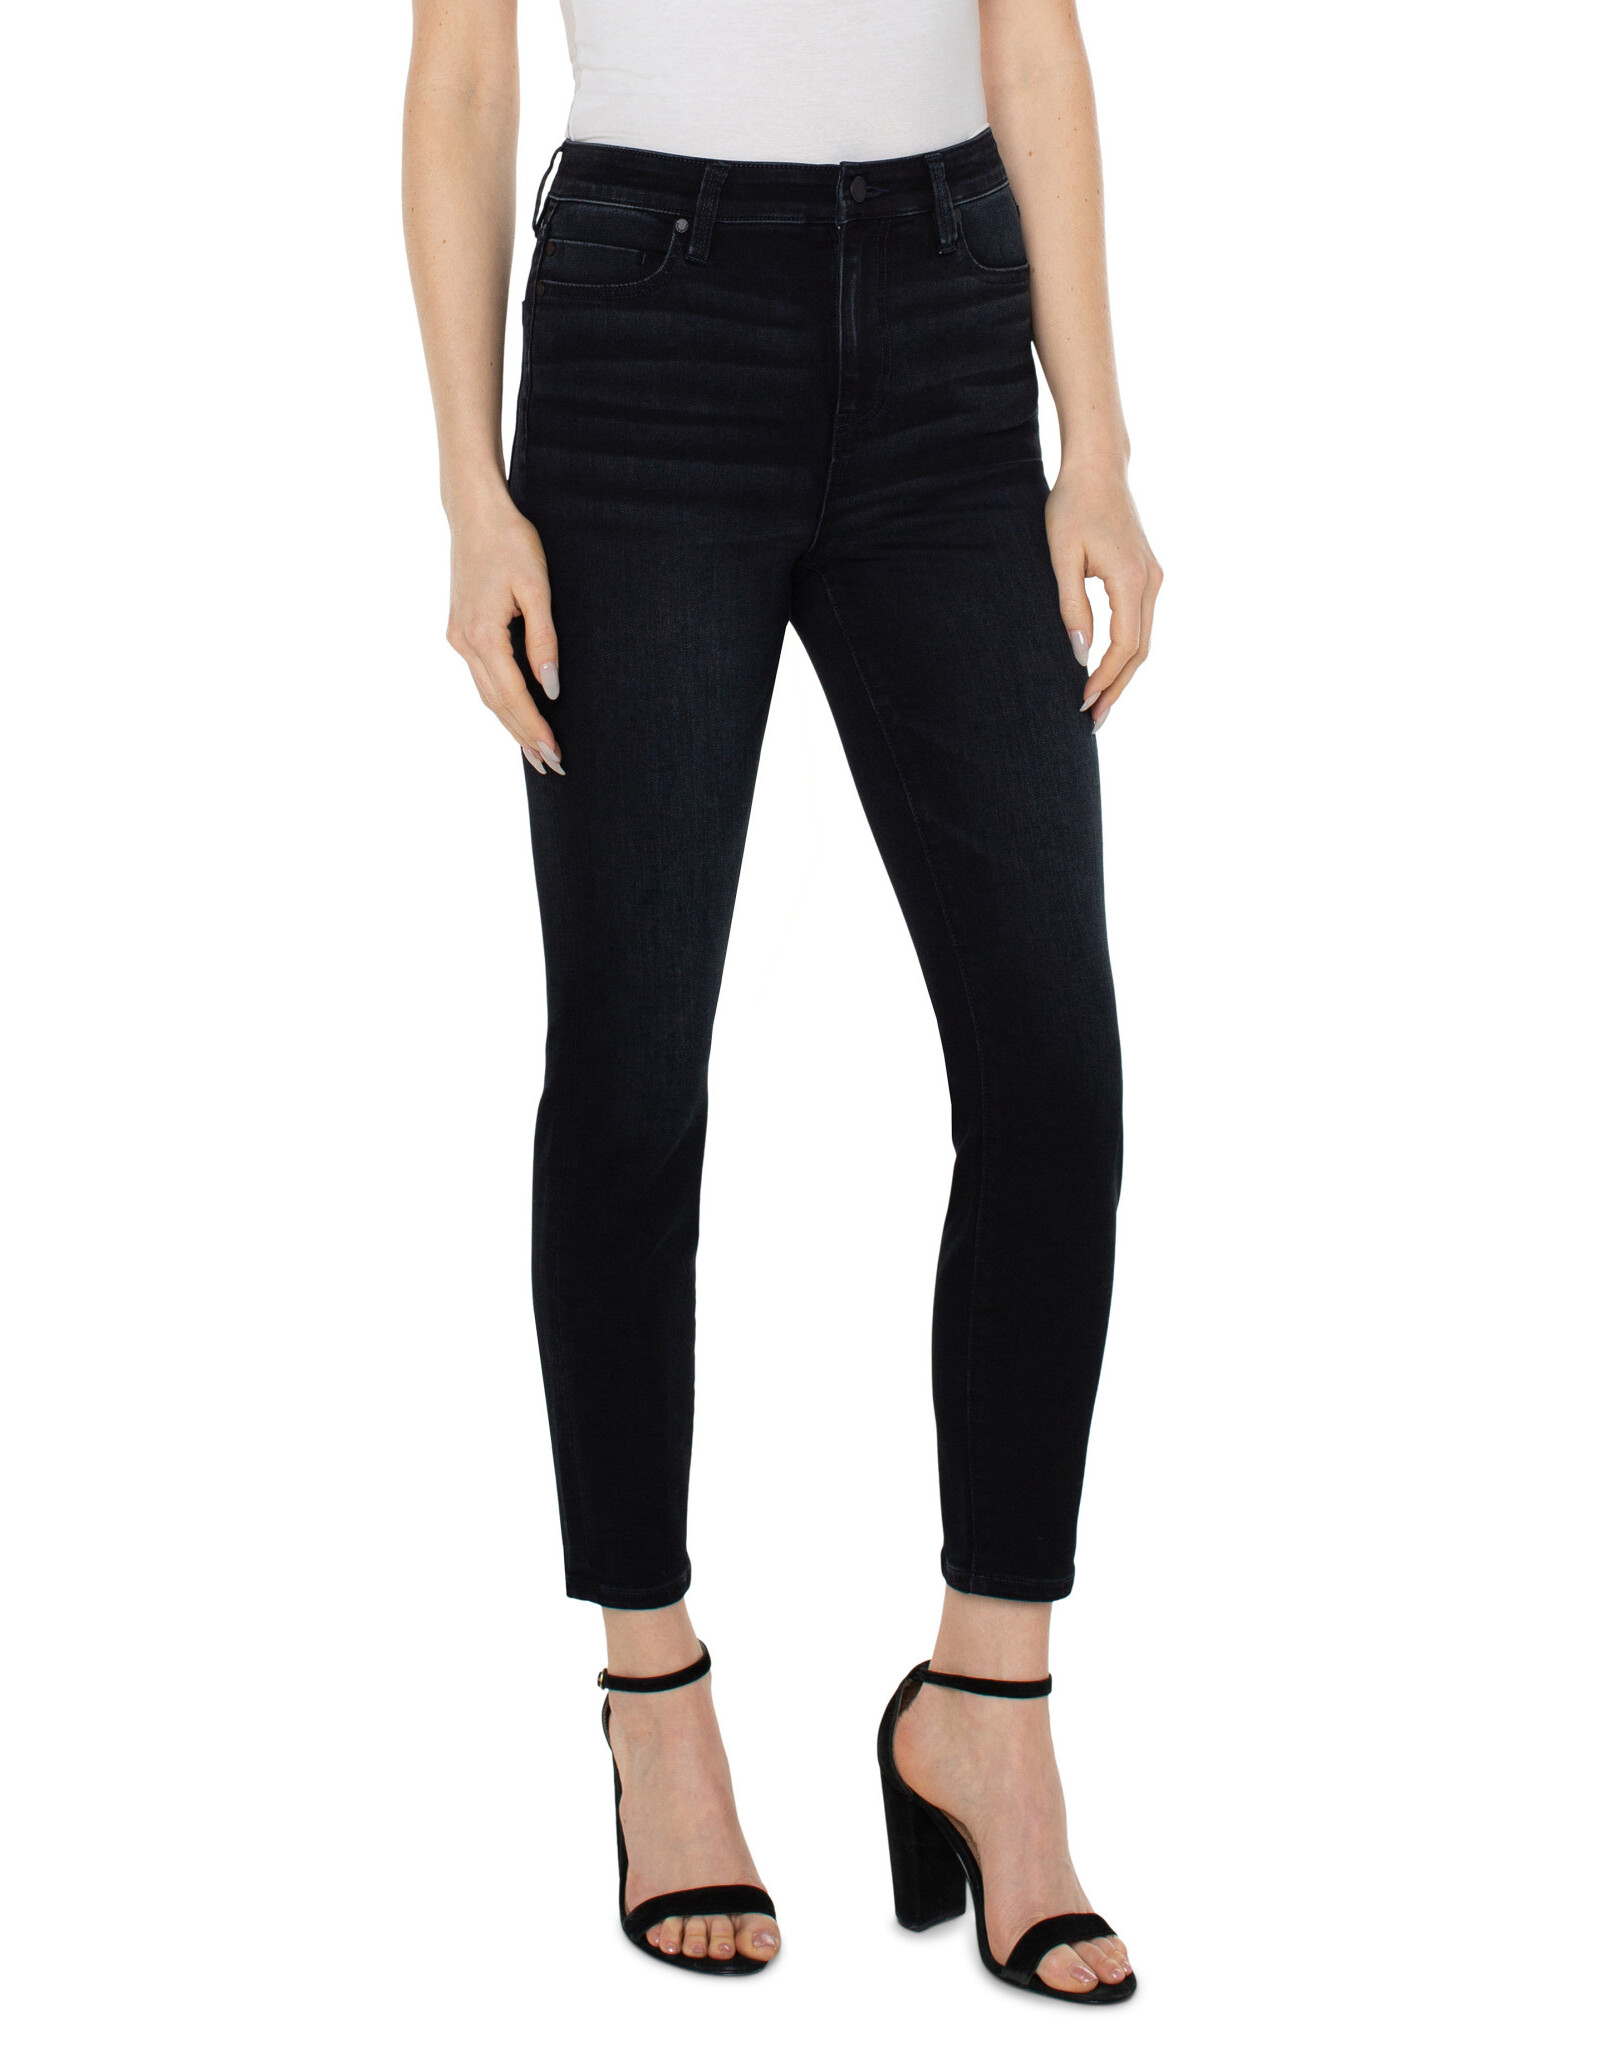 Liverpool Liverpool - Abby high rise ankle skinny (Apollo)